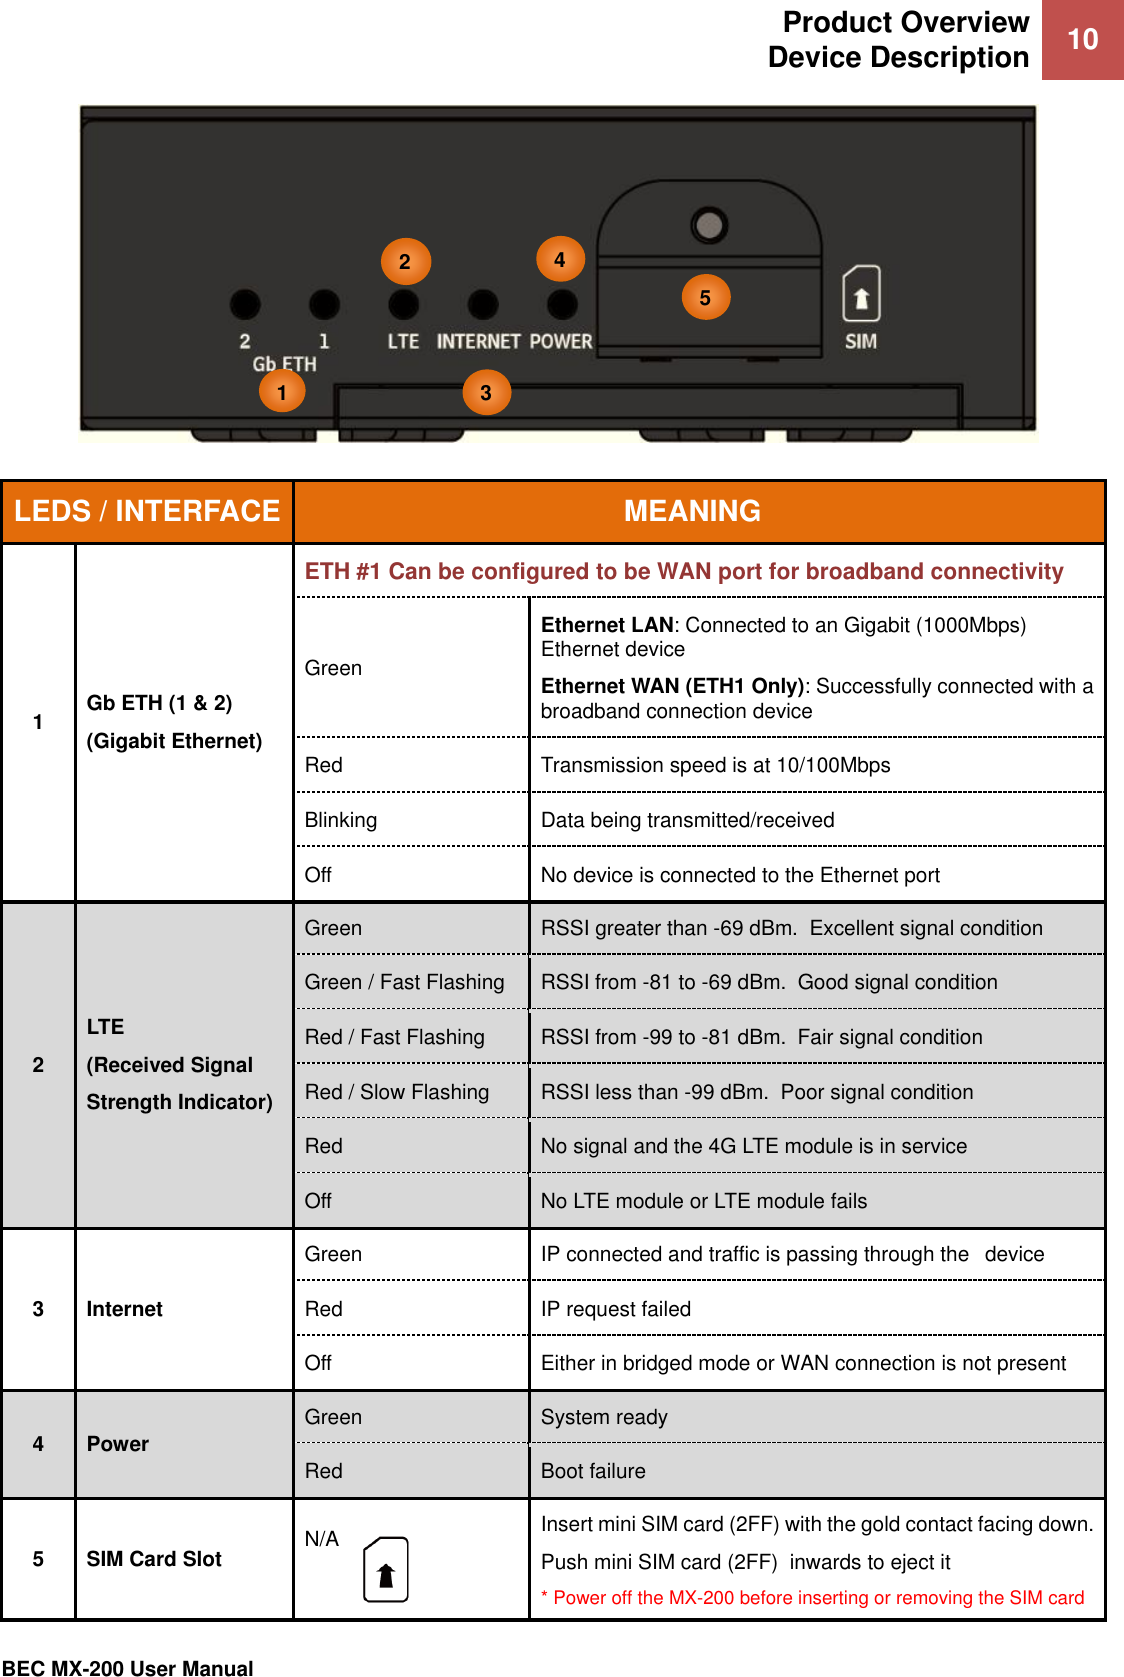 Product Overview Device Description 10   BEC MX-200 User Manual   LEDS / INTERFACE MEANING 1 Gb ETH (1 &amp; 2) (Gigabit Ethernet) ETH #1 Can be configured to be WAN port for broadband connectivity Green Ethernet LAN: Connected to an Gigabit (1000Mbps) Ethernet device Ethernet WAN (ETH1 Only): Successfully connected with a broadband connection device Red Transmission speed is at 10/100Mbps Blinking Data being transmitted/received Off No device is connected to the Ethernet port 2 LTE (Received Signal  Strength Indicator) Green RSSI greater than -69 dBm.  Excellent signal condition Green / Fast Flashing  RSSI from -81 to -69 dBm.  Good signal condition Red / Fast Flashing  RSSI from -99 to -81 dBm.  Fair signal condition Red / Slow Flashing RSSI less than -99 dBm.  Poor signal condition Red No signal and the 4G LTE module is in service Off No LTE module or LTE module fails 3  Internet Green IP connected and traffic is passing through the device Red IP request failed Off Either in bridged mode or WAN connection is not present 4 Power Green System ready Red Boot failure 5 SIM Card Slot N/A Insert mini SIM card (2FF) with the gold contact facing down.  Push mini SIM card (2FF)  inwards to eject it * Power off the MX-200 before inserting or removing the SIM card 10 1 2 31 41 51 